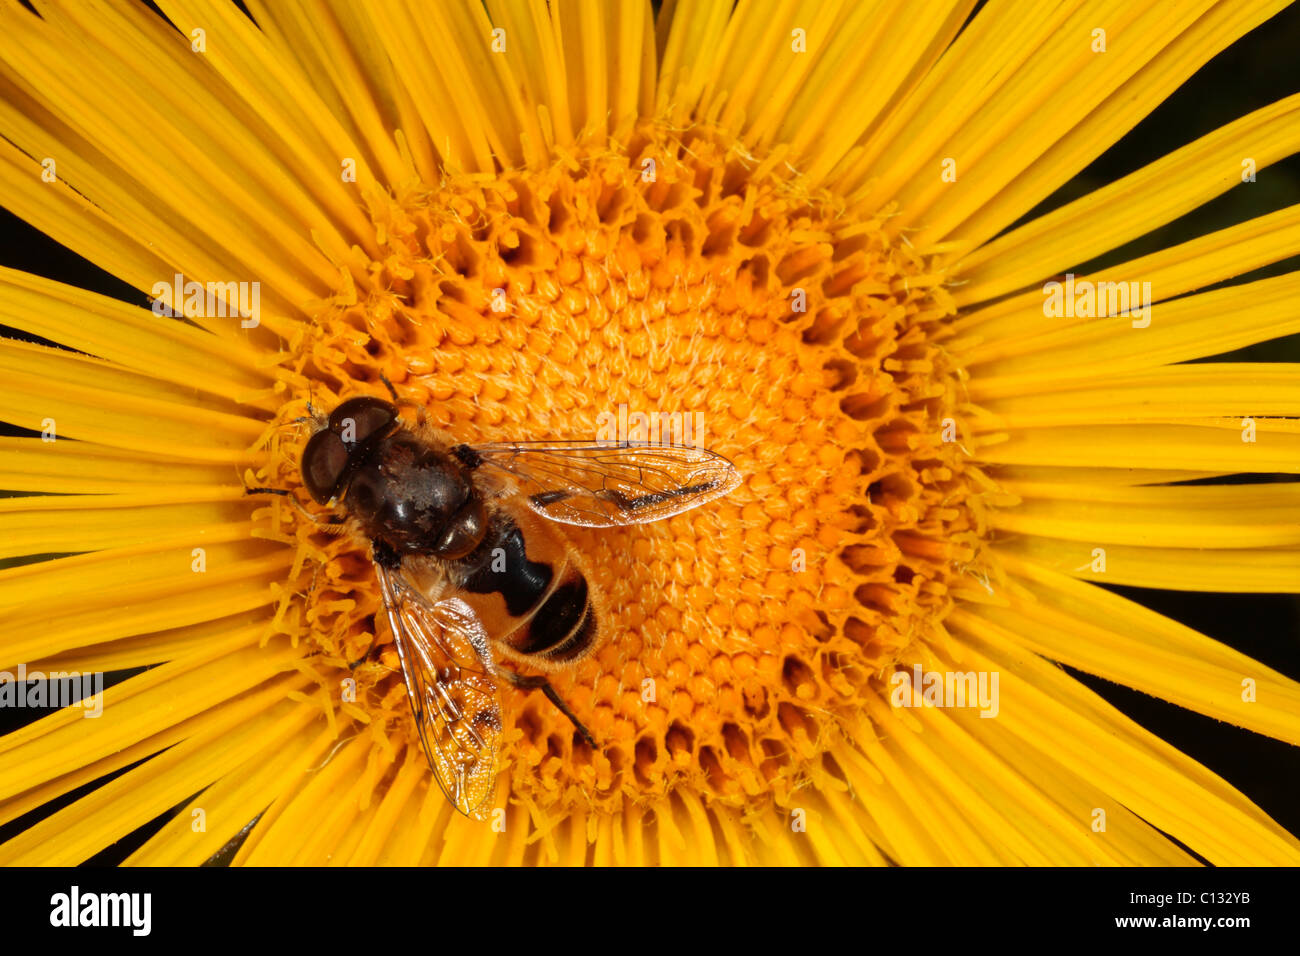 Hoverfly Eristalis sp. male feeding on an Inula flower in a garden. Powys, Wales. Stock Photo